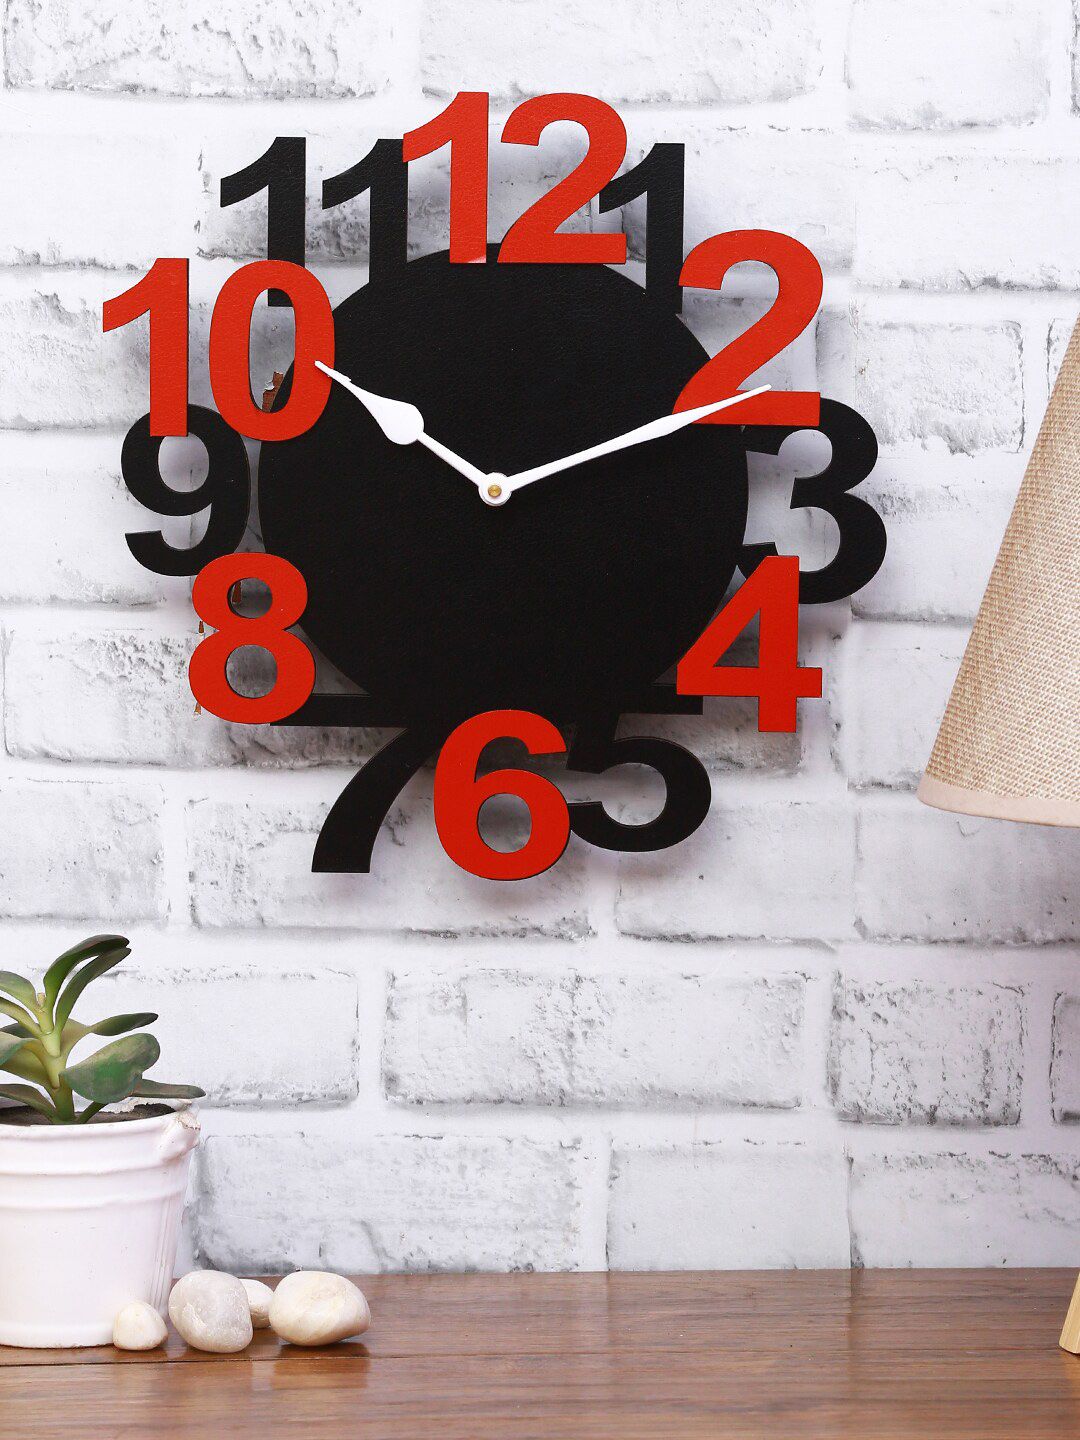 ROMEE Black & Red Round Solid 30 cm Analogue Wall Clock Price in India